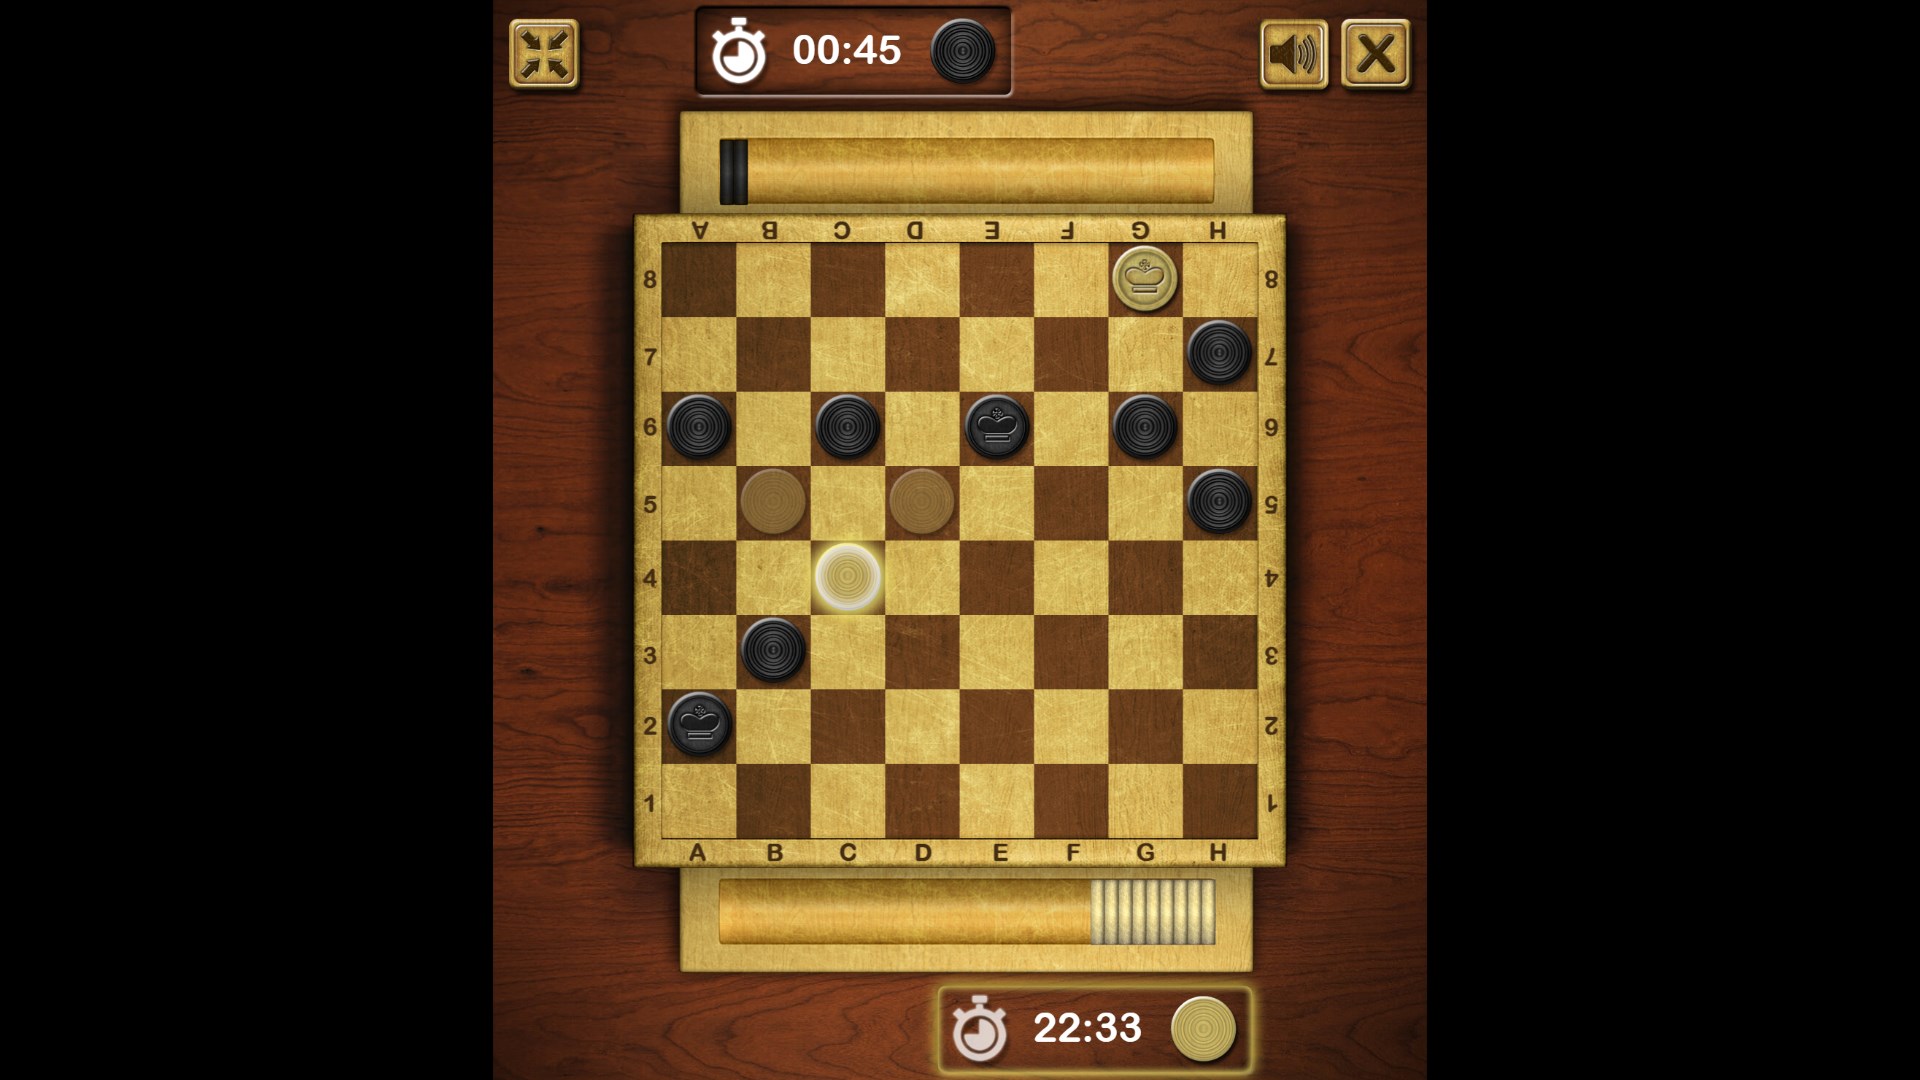 Live Checkers game 83.3 games against another Grand Master on